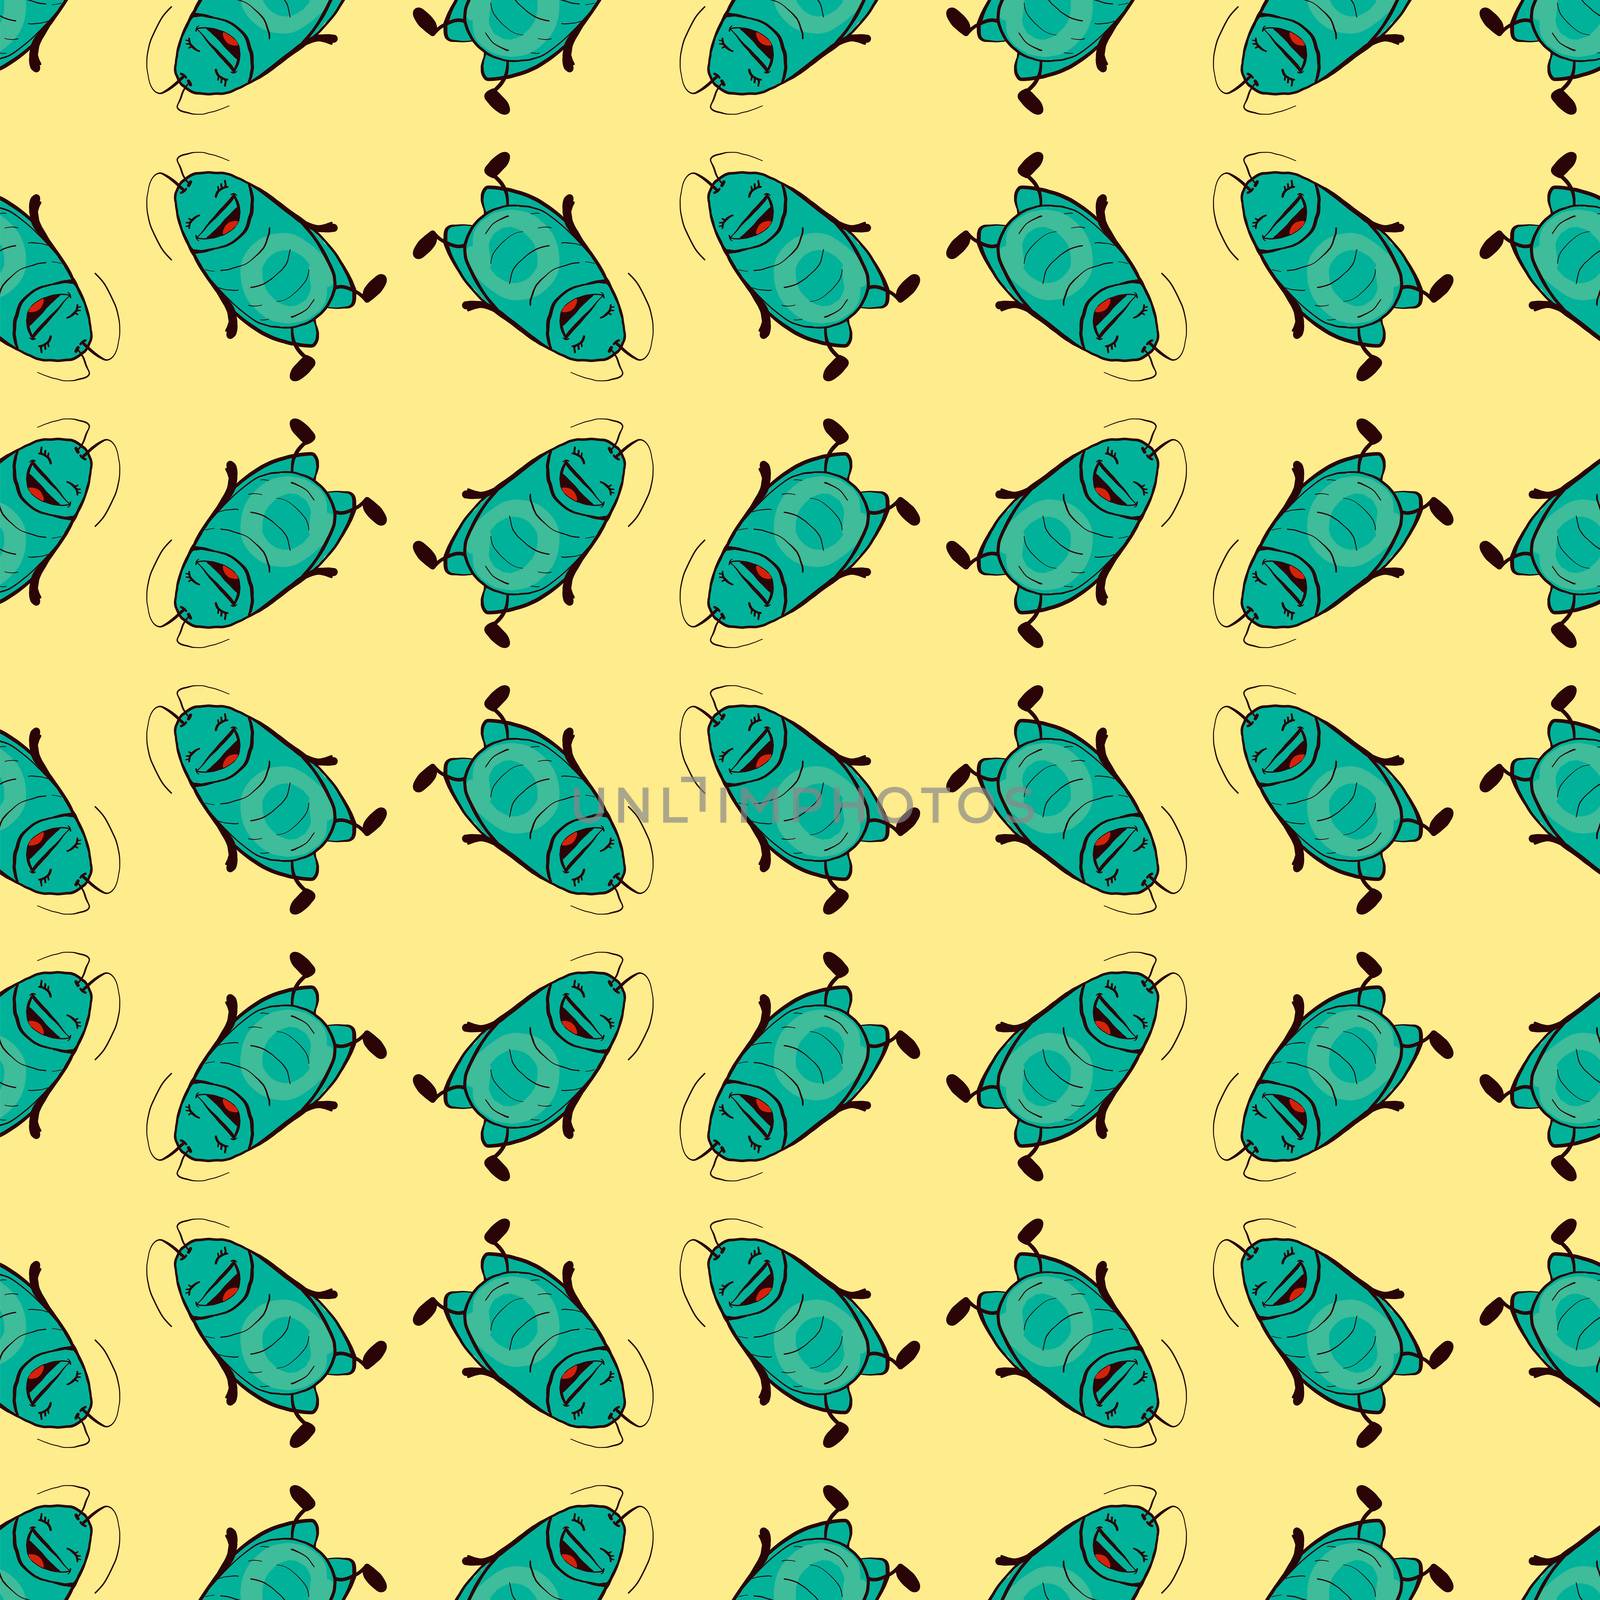 Cockroach pattern , illustration, vector on white background